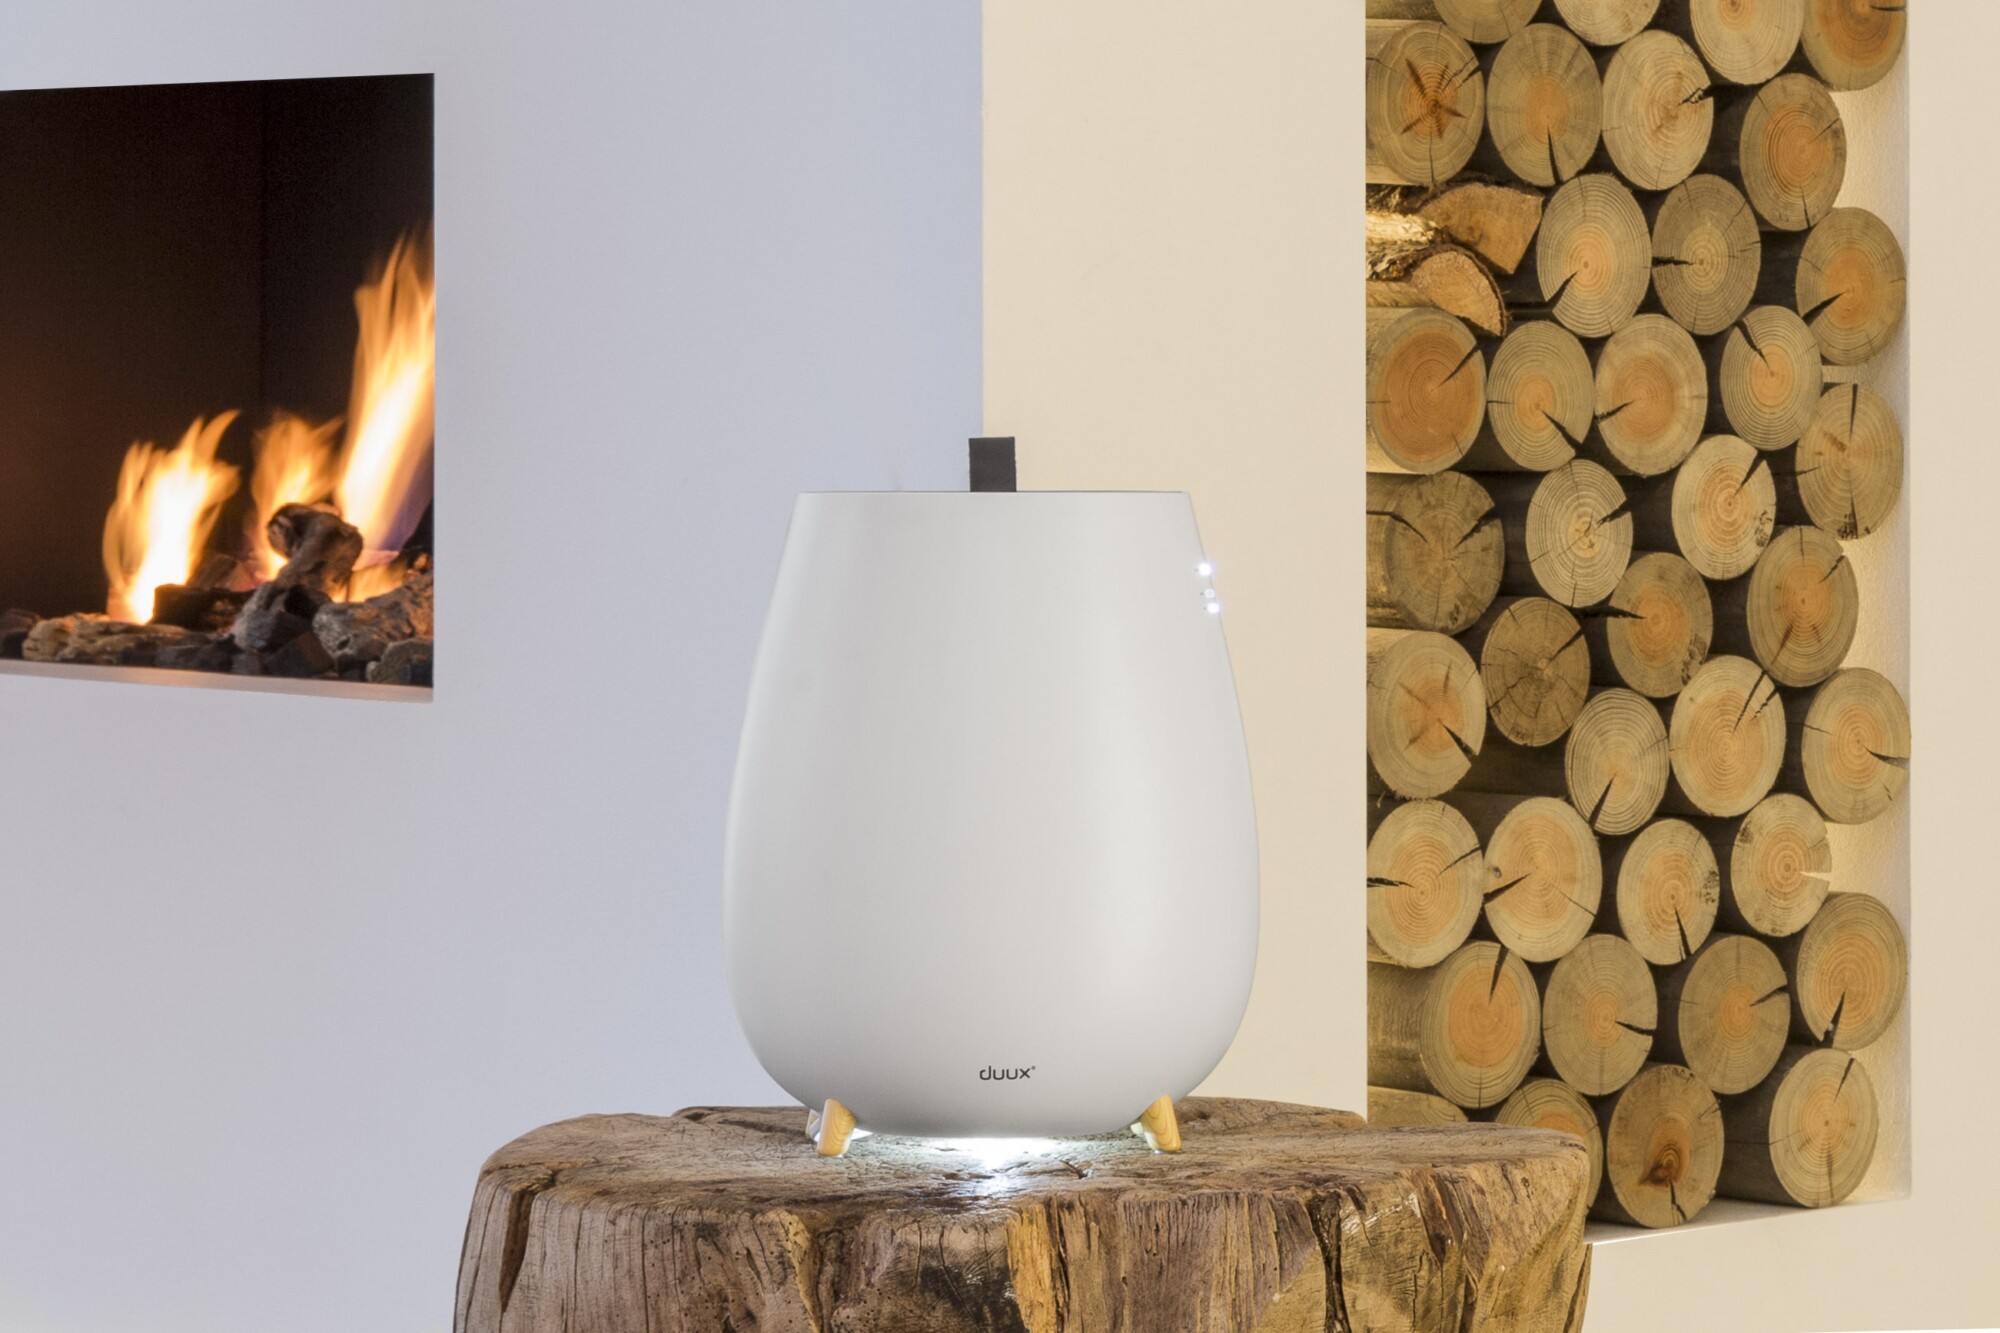 Duux Tag Ultrasonic Humidifier in white.